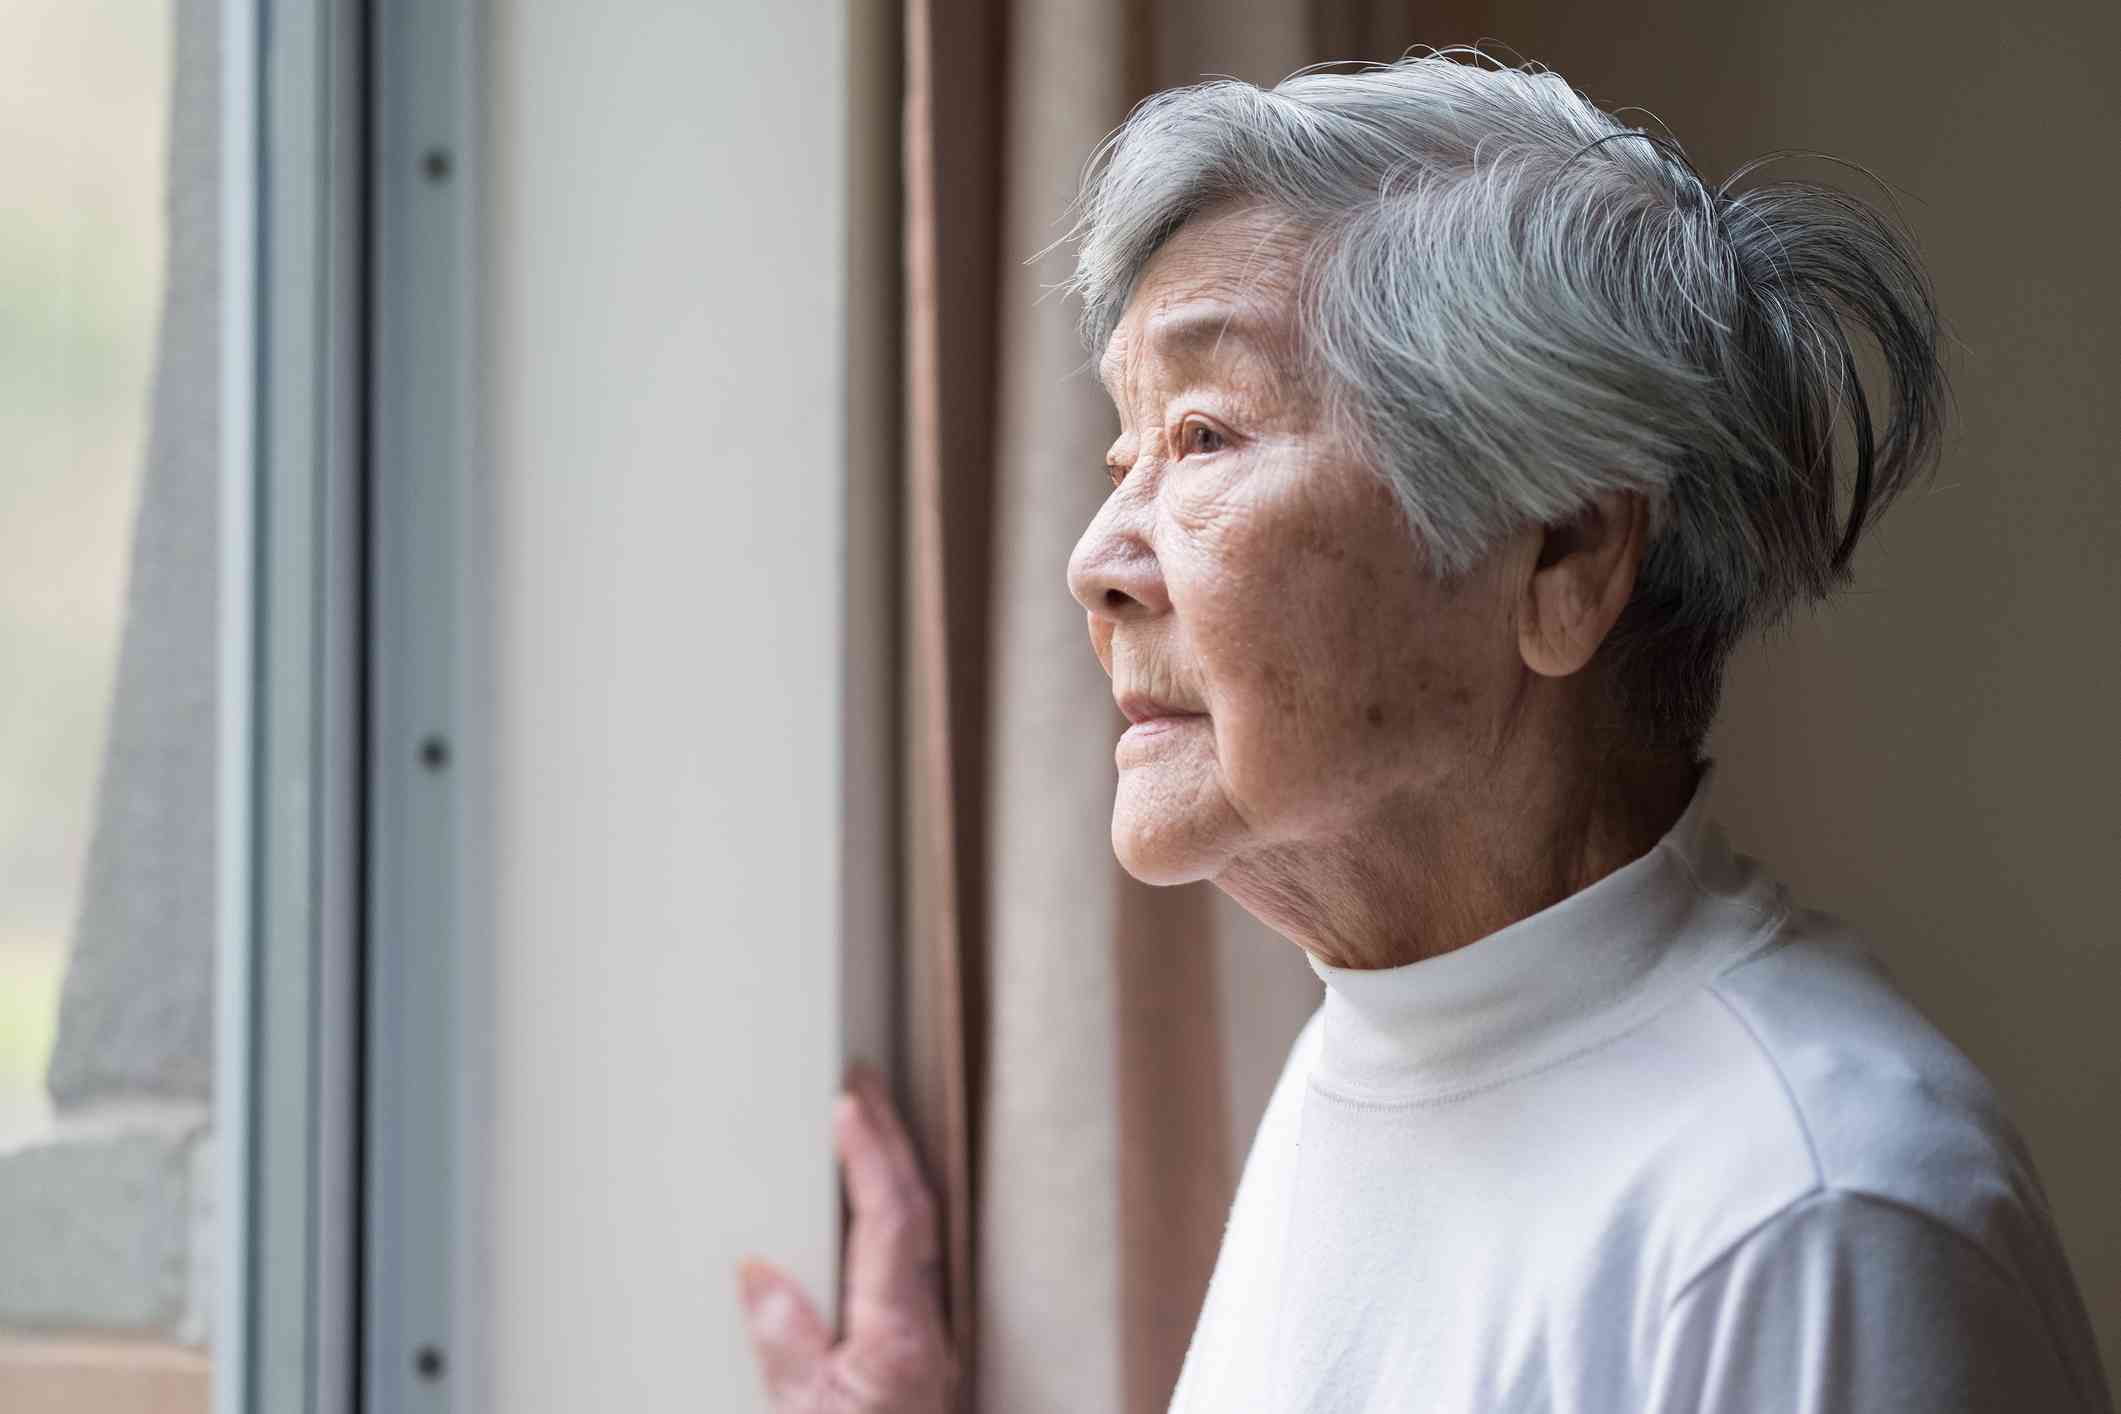 A close up of a mature woman as she gazes out of a window with a sad expression while deep in thought.